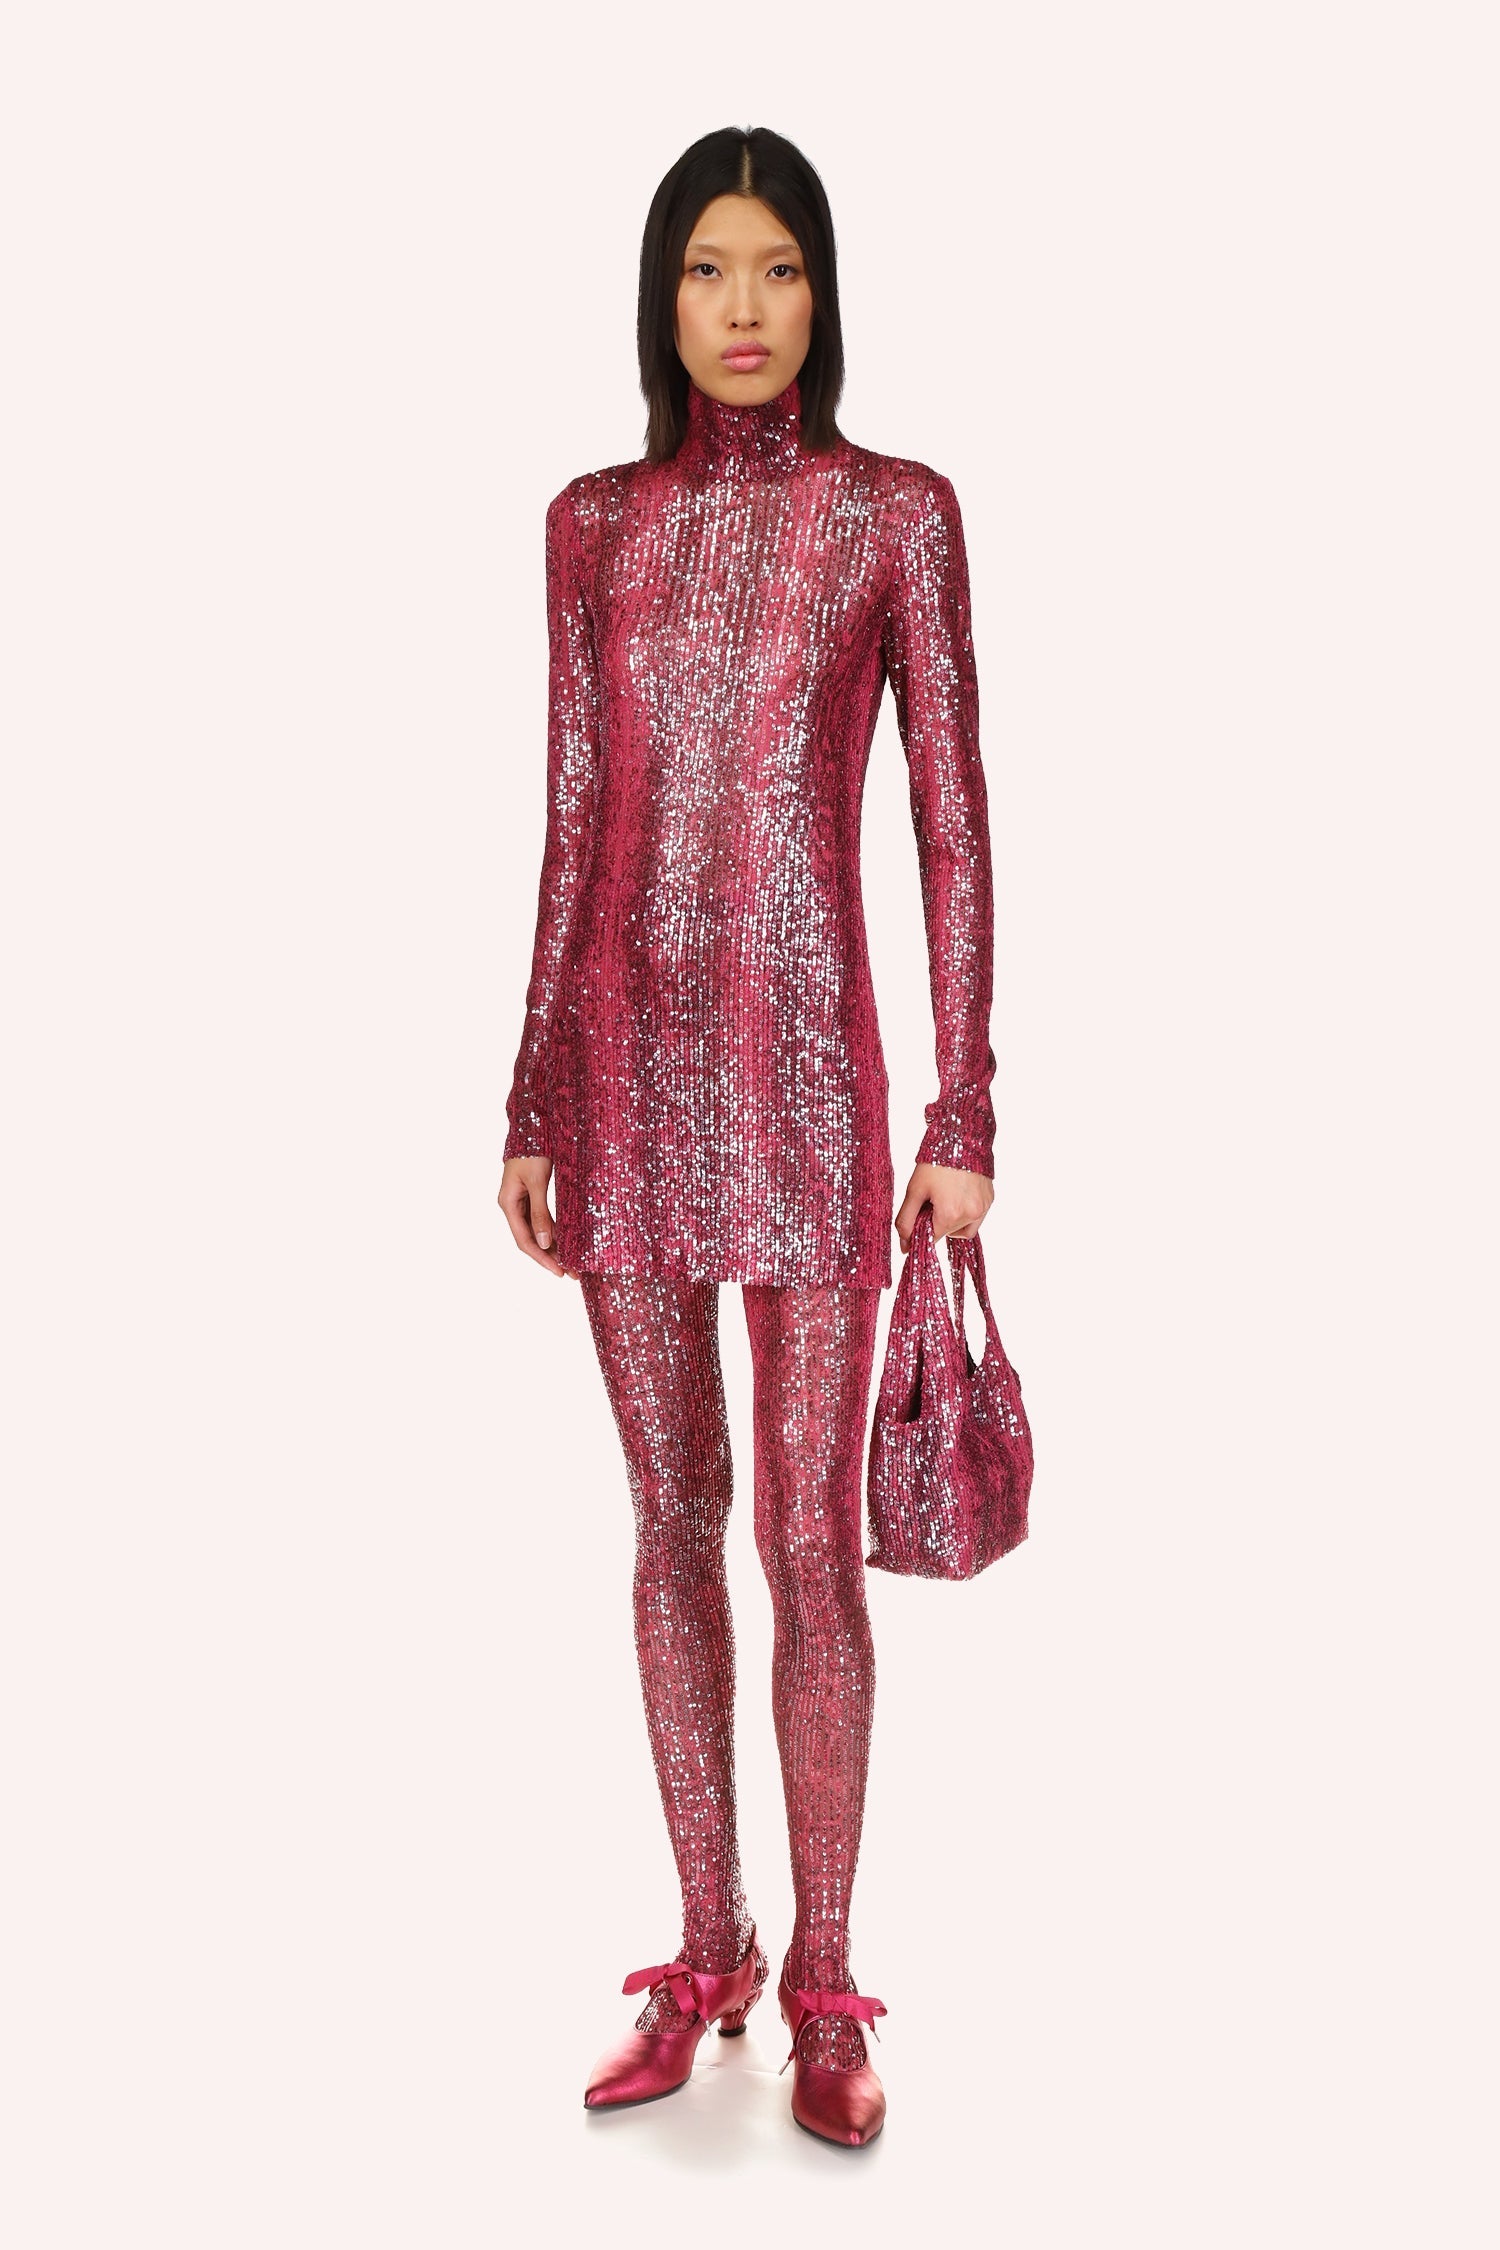 The Snakeskin Sequin Turtleneck Dress Ruby Multi is mini, shiny ruby red color, long sleeves, and turtle neck collar